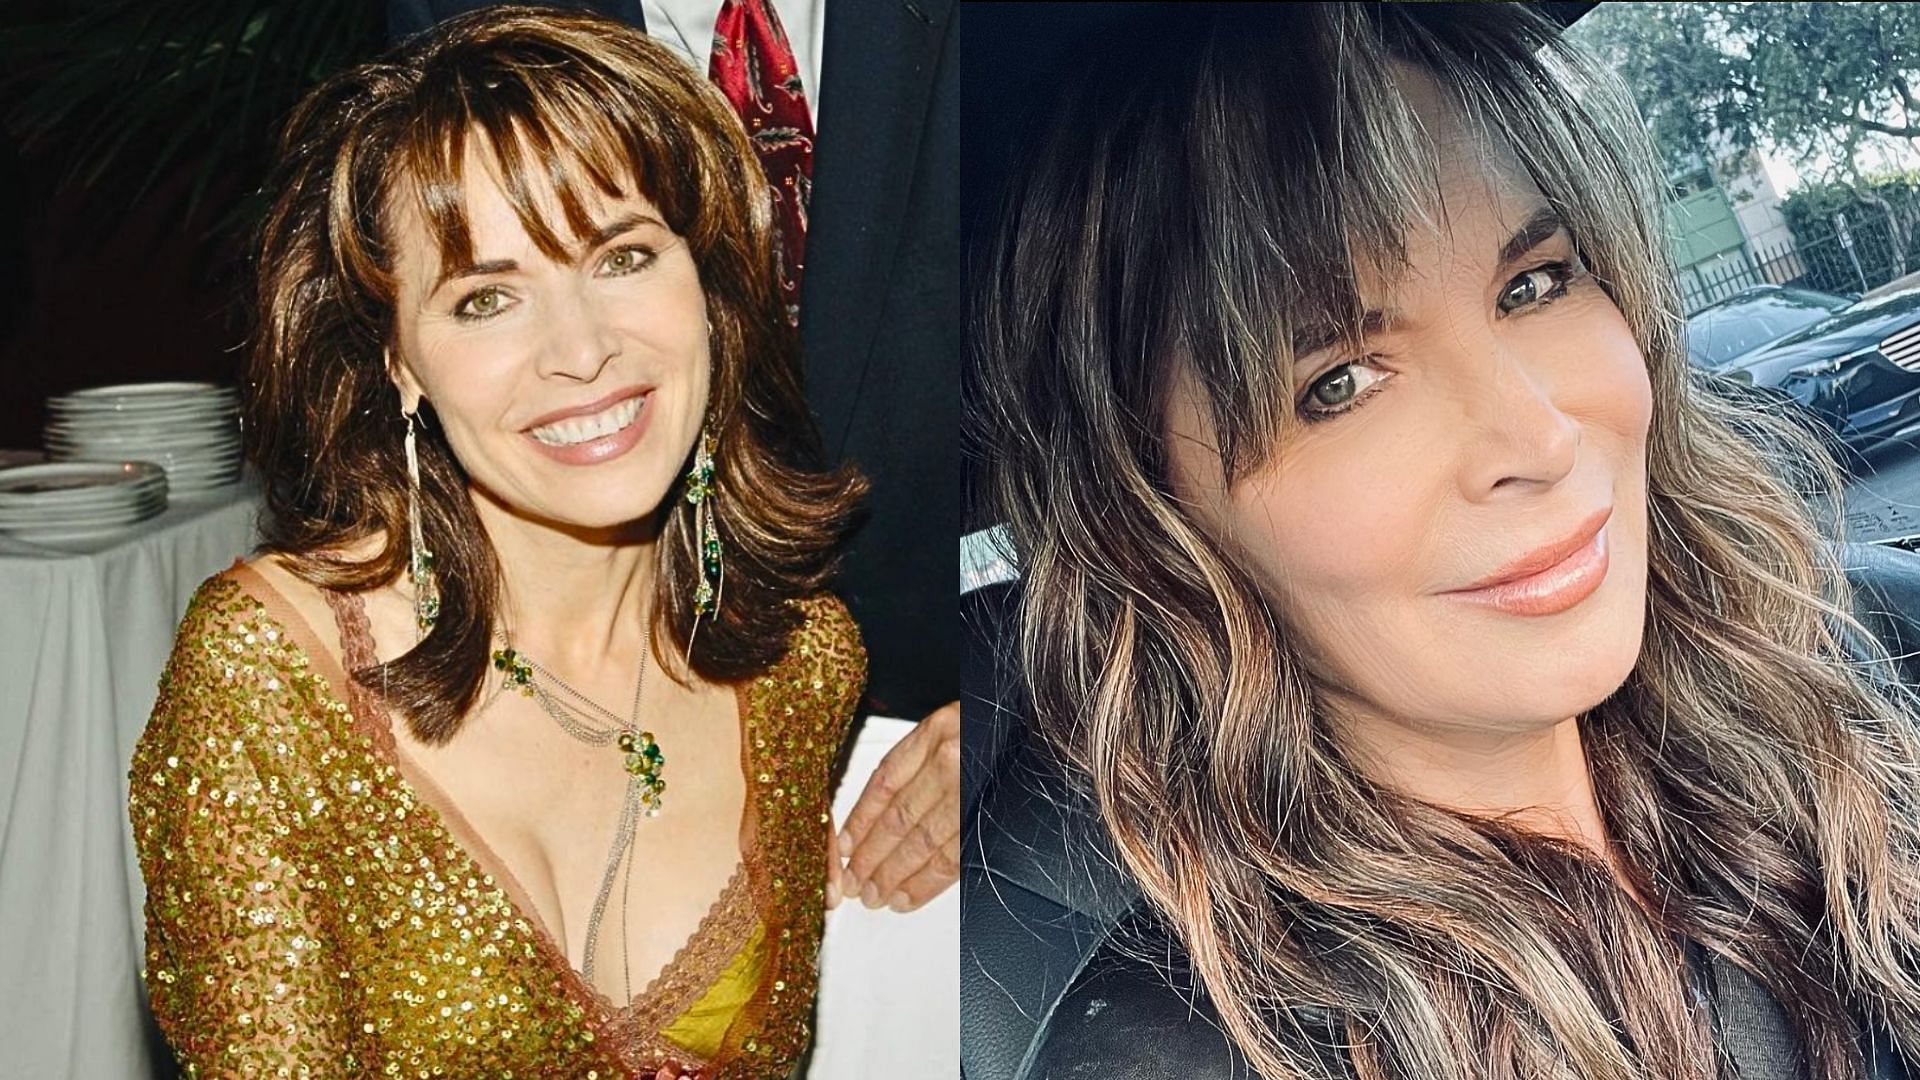 Lauren Koslow has played Kate Roberts on Days of Our Lives since 1996 (Images via Instagram/@laurenkoslow)